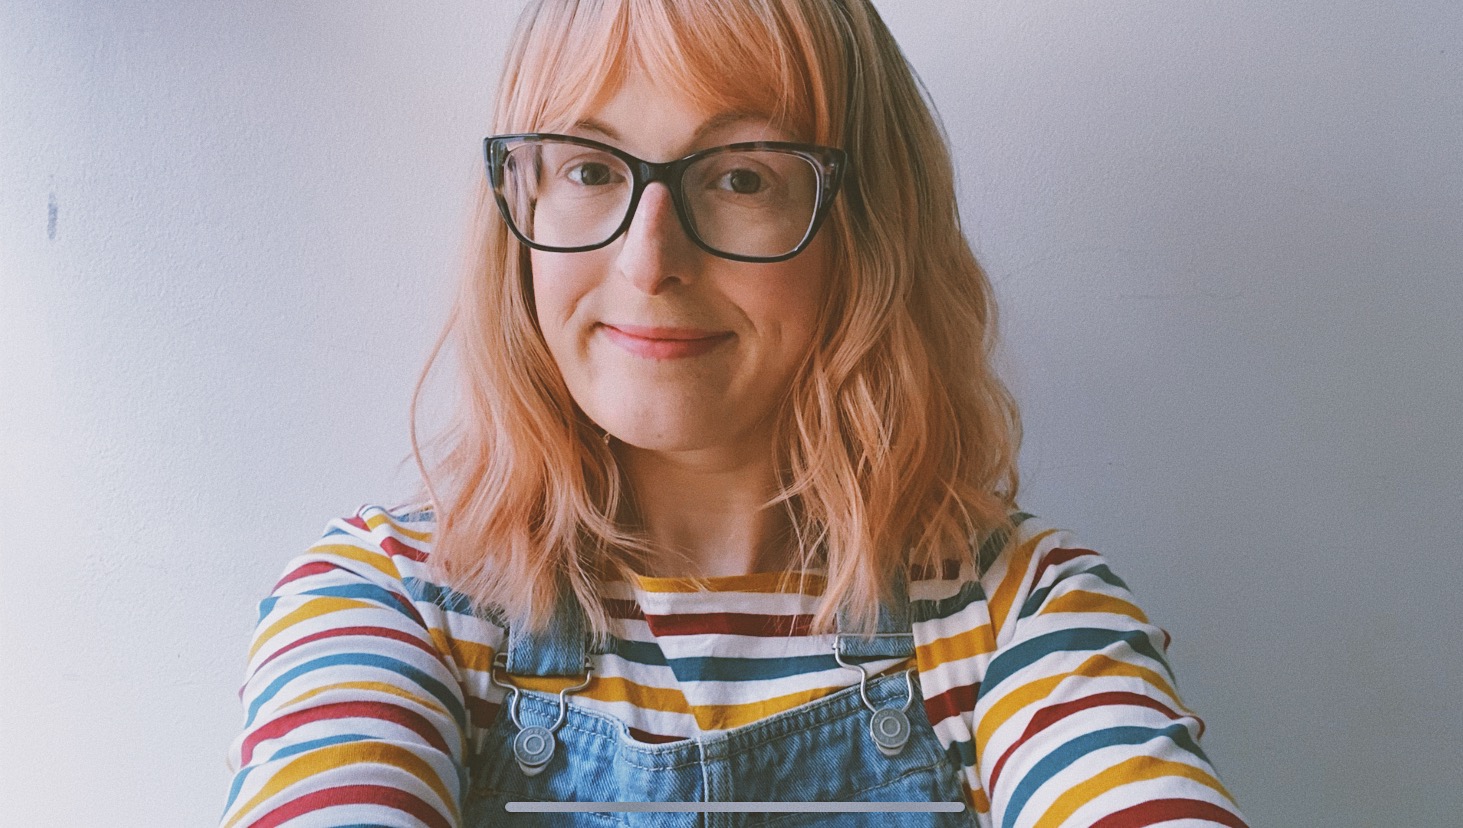 Jen Campbell - a white woman wearing glasses and a pink-tinged wig, looks into the camera with a half-smile. She's wearing denim dungarees and a striped top in off-white, burgundy, mustard and teal.